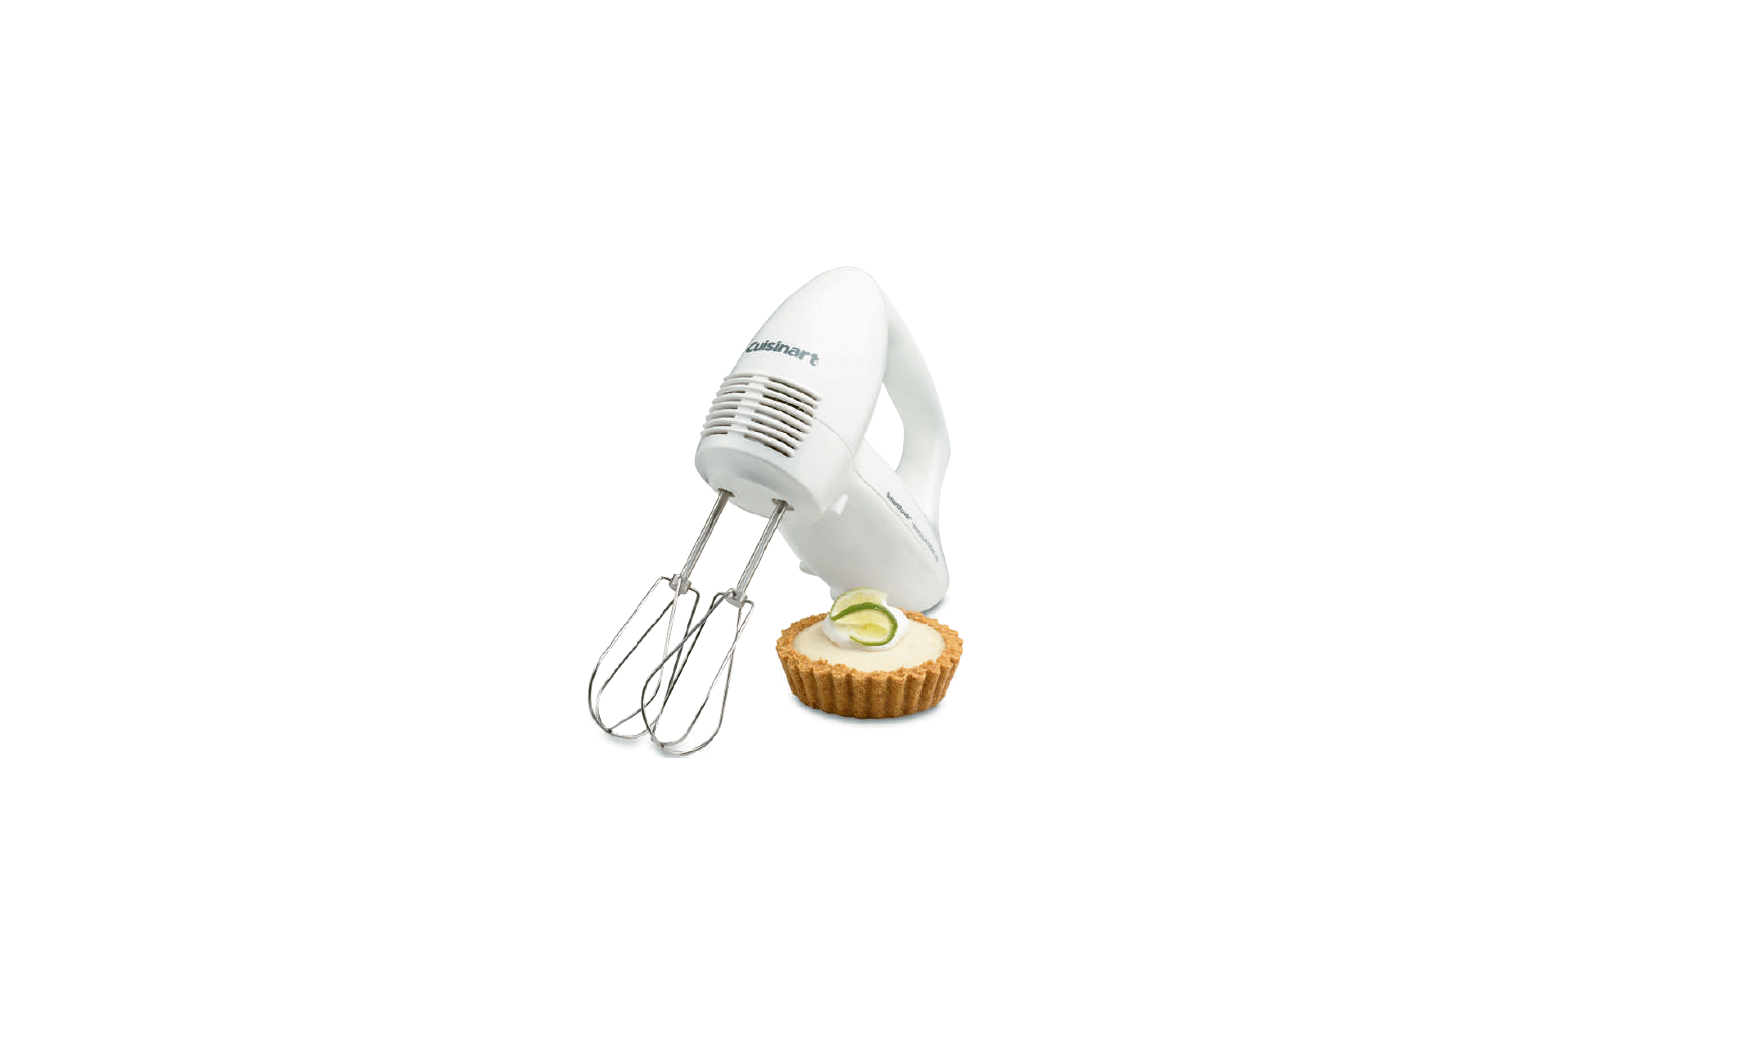 HTM-7L - SmartPower Electronic LED Hand Mixer